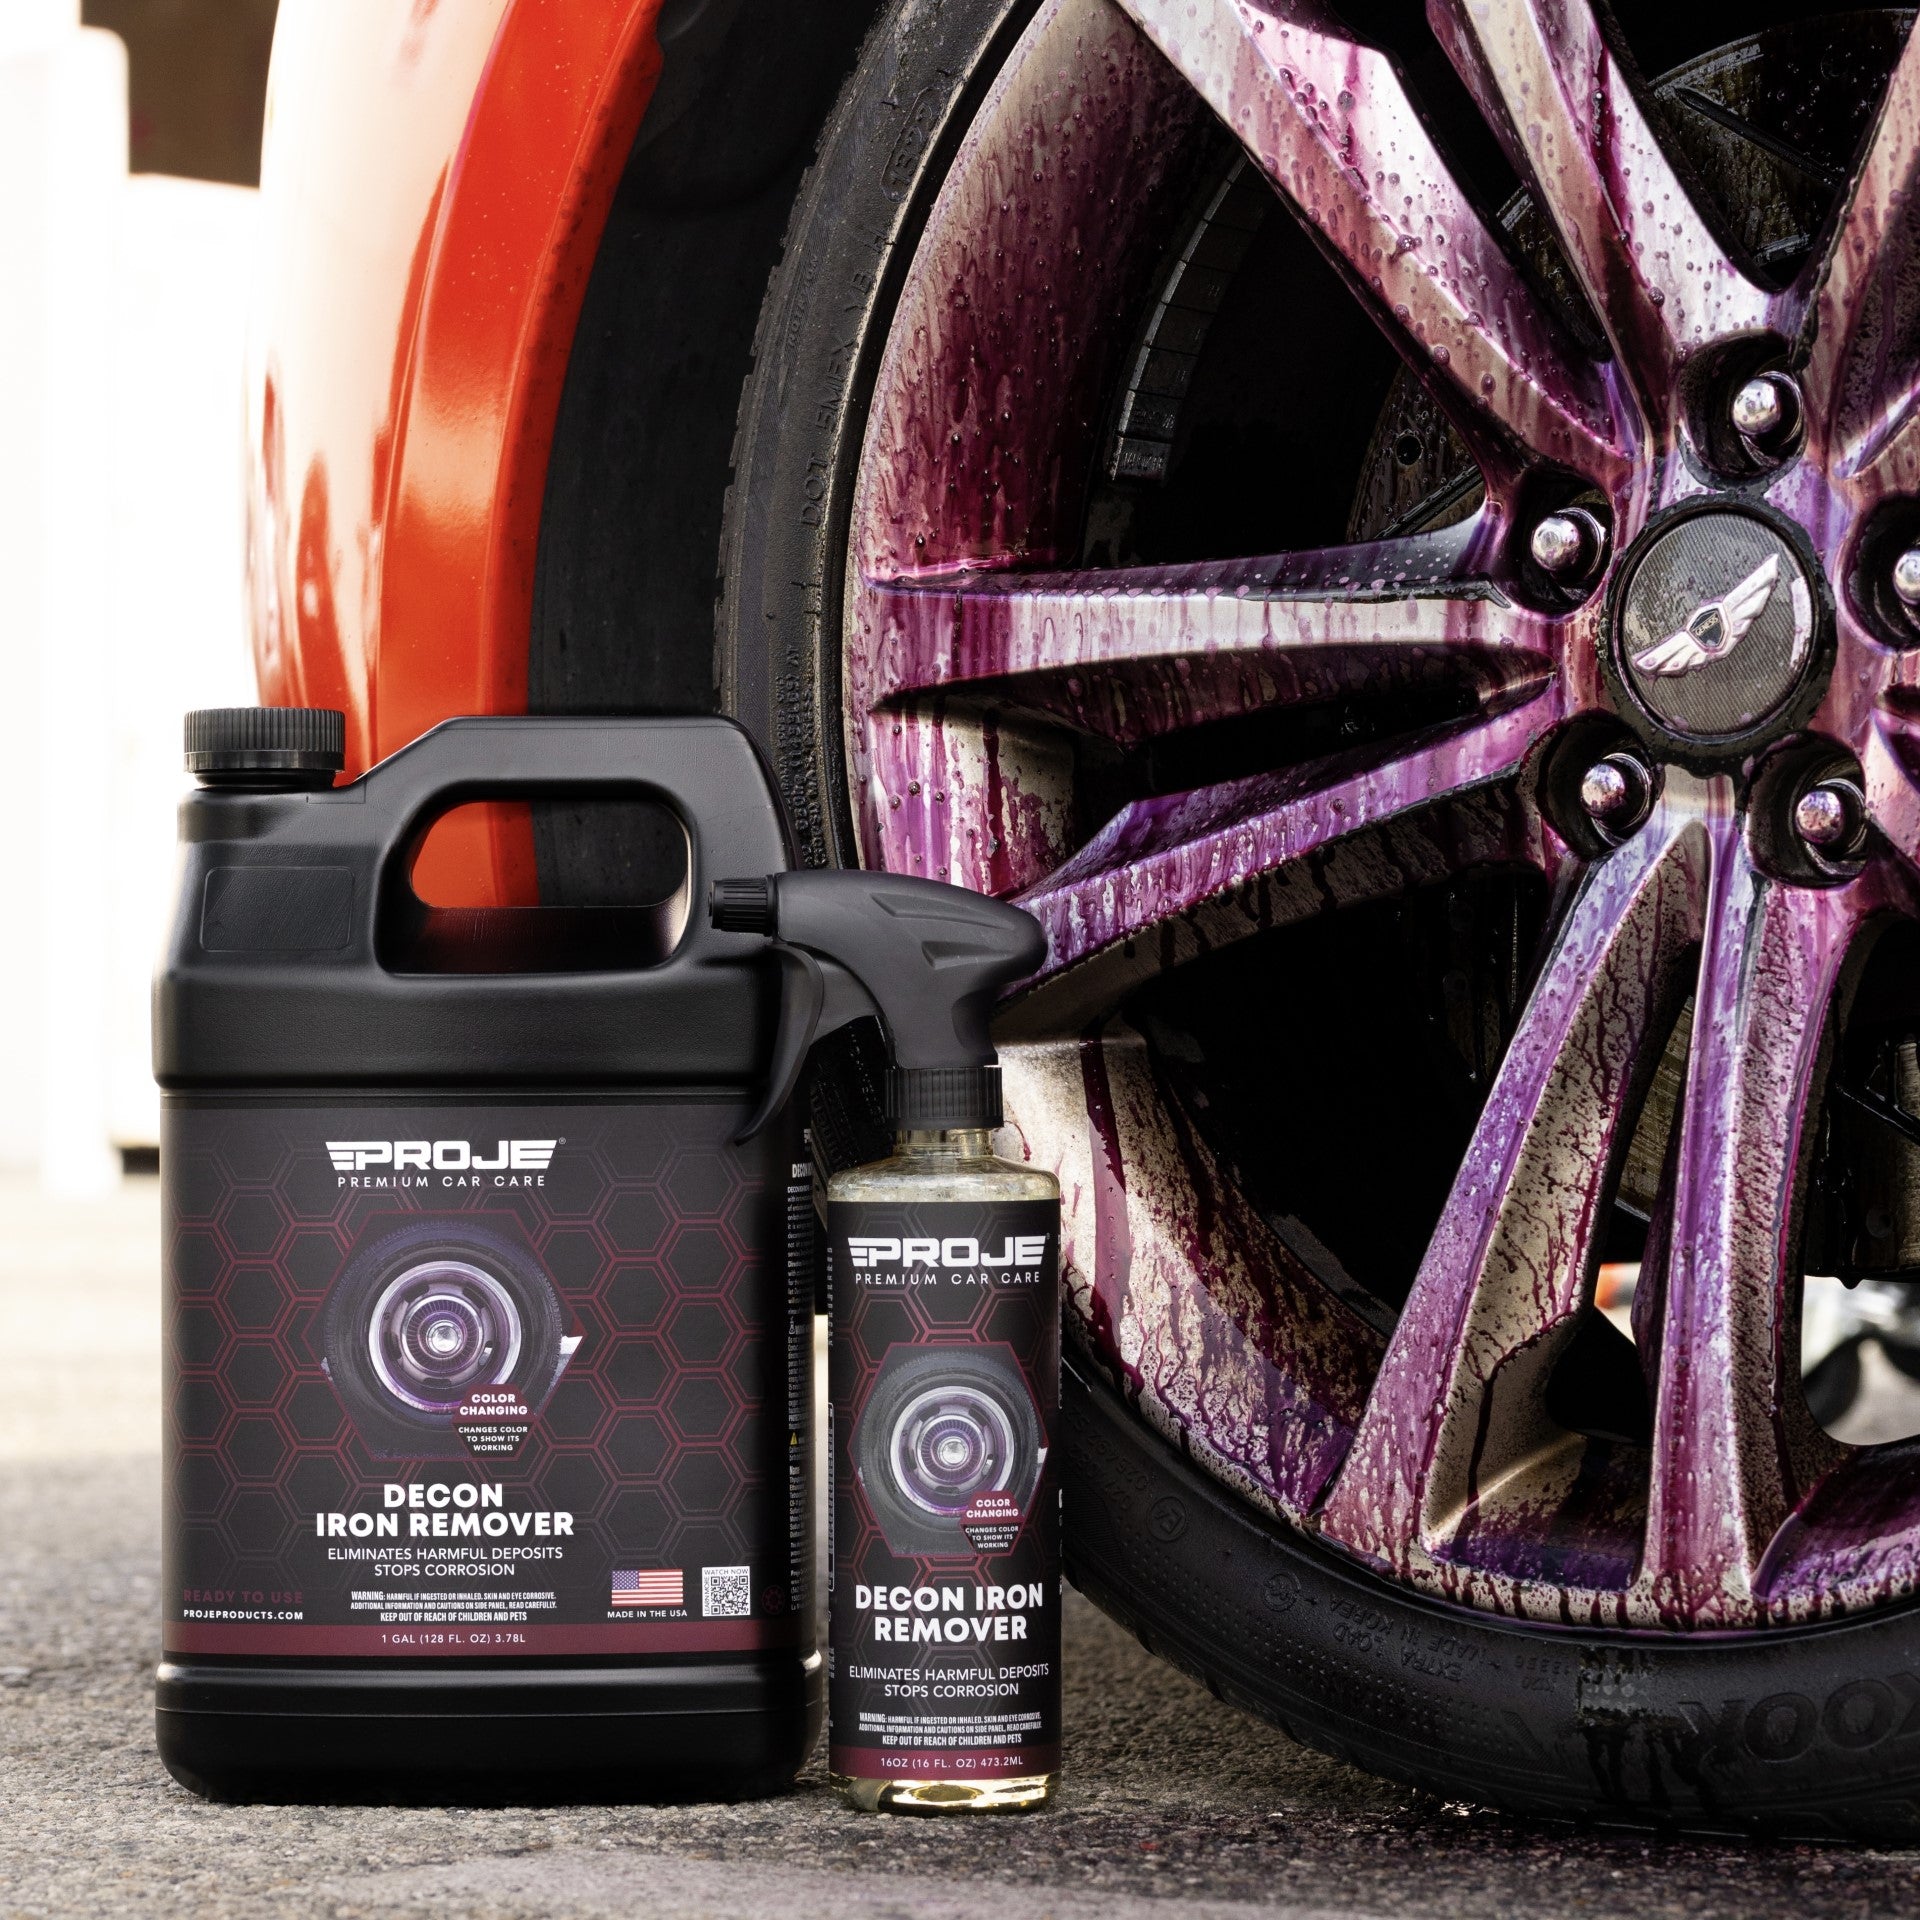  Swift Iron Remover & Wheel Cleaner (16 Oz) – Remove Brake Dust,  Iron Oxide & Stuck-On Dirt & Debris from Paint & Wheels, Effective Formula  for Decon Car Wash